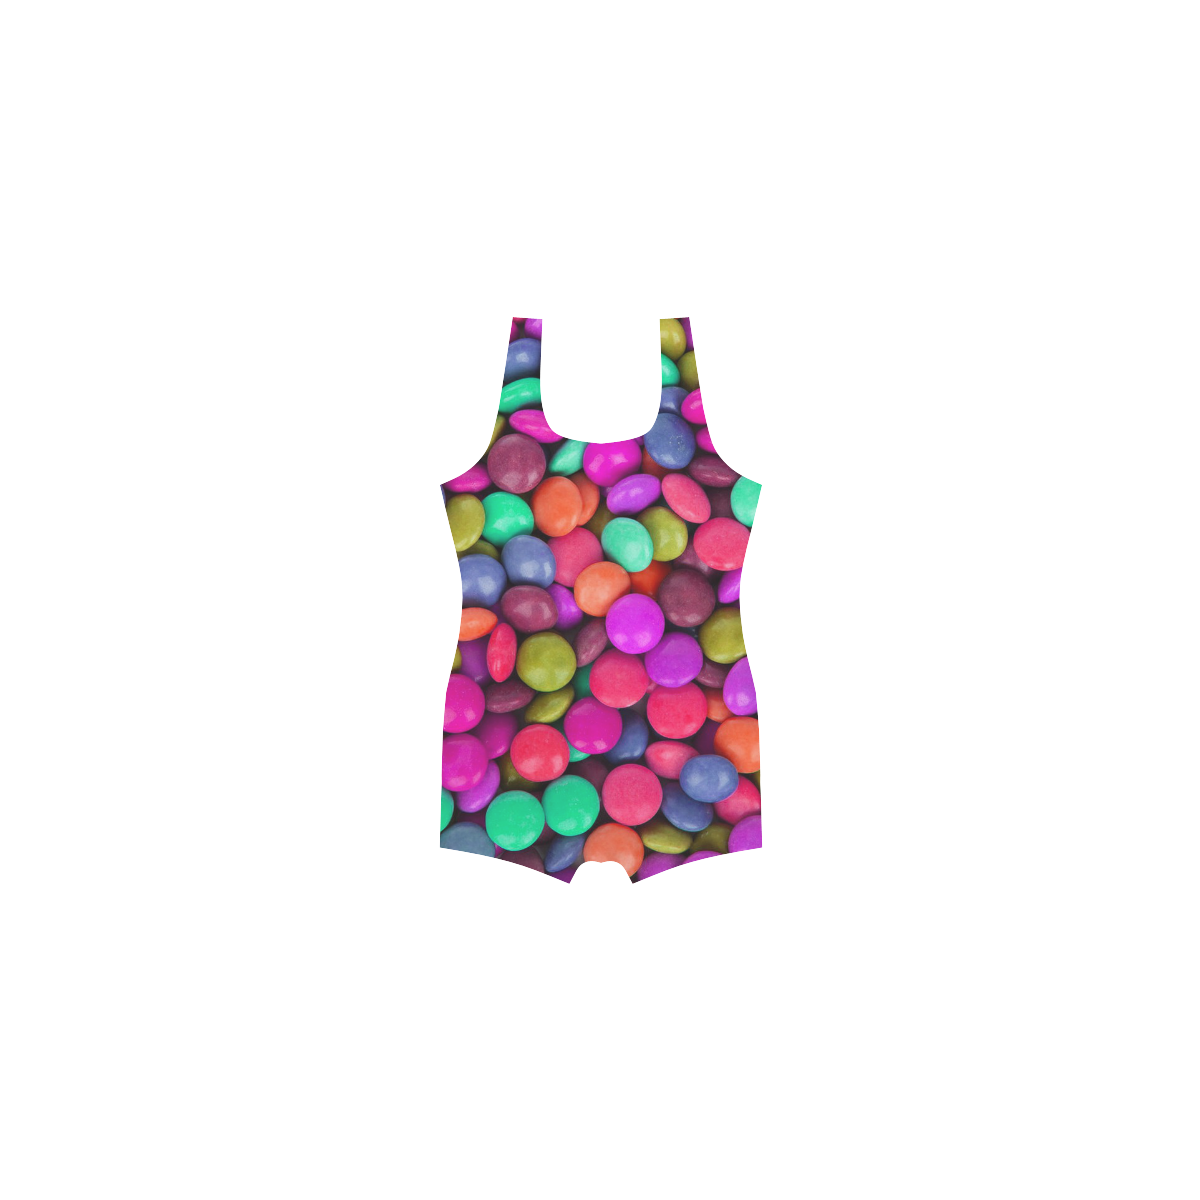 candy buttons Classic One Piece Swimwear (Model S03)